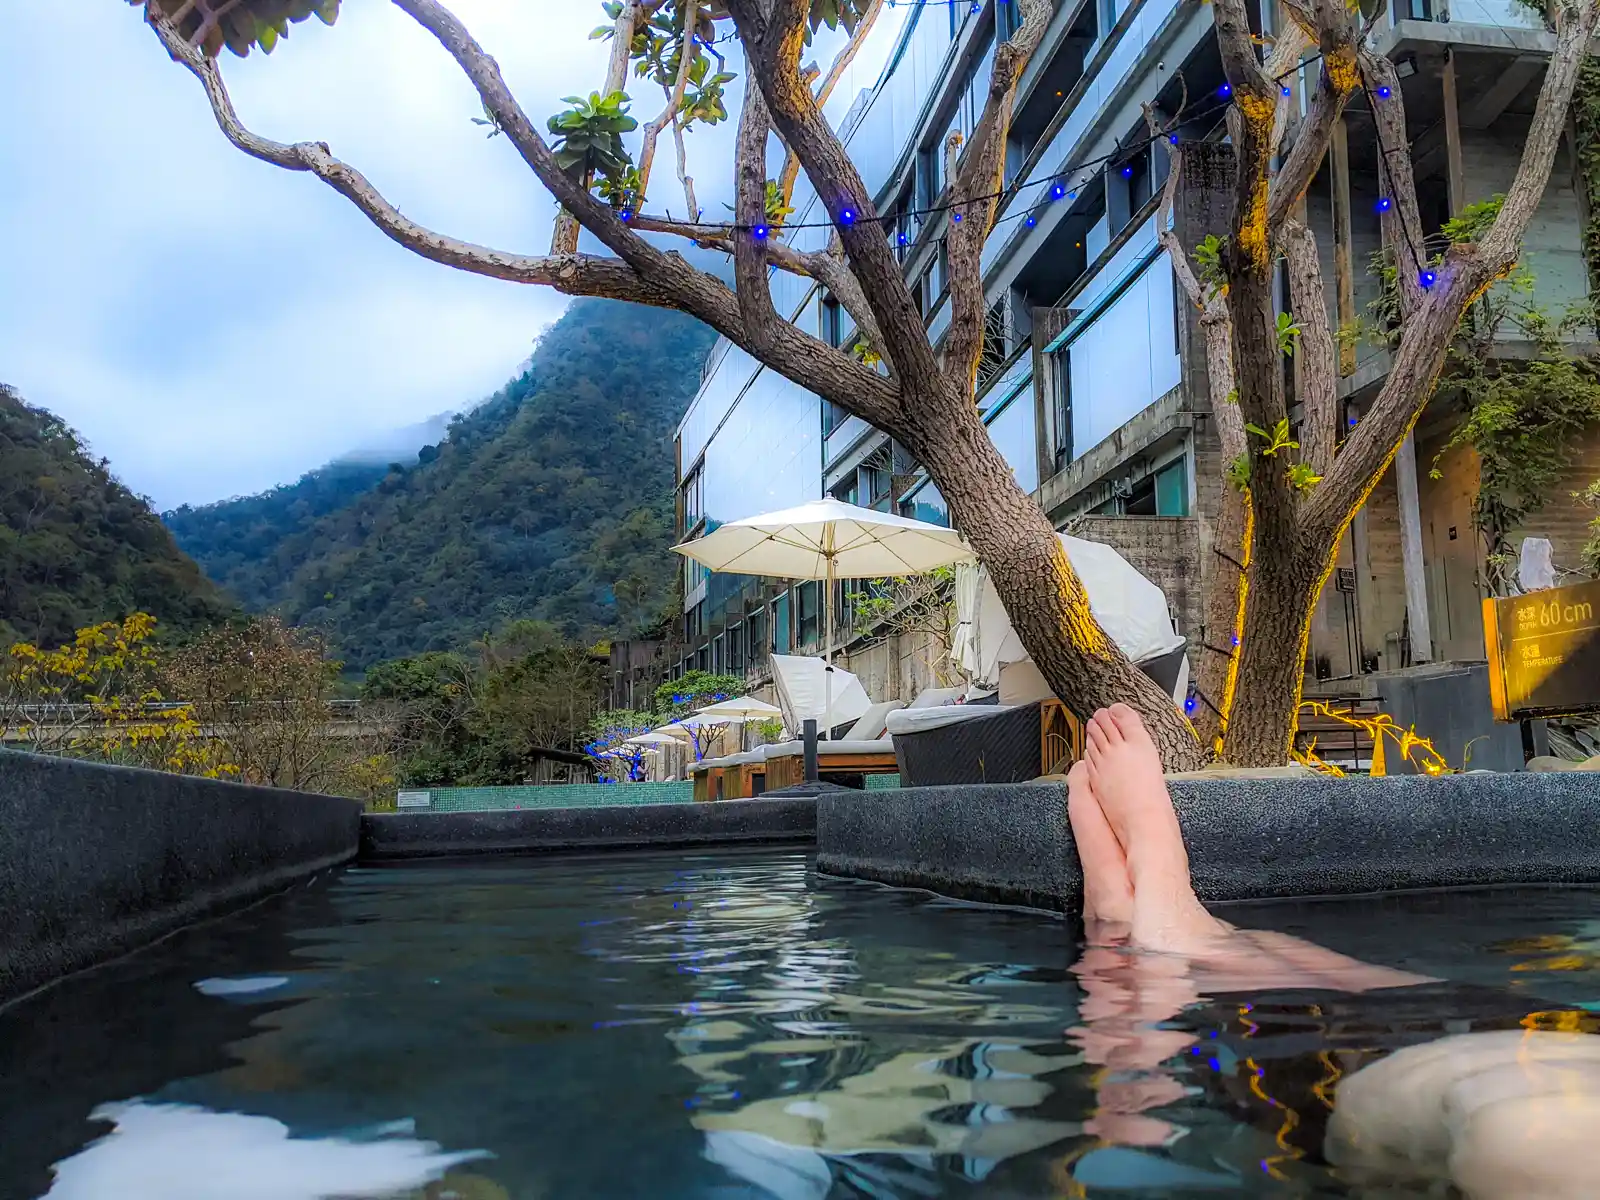 A person's feet can be seen coming out of the water as they soak in a hot spring.